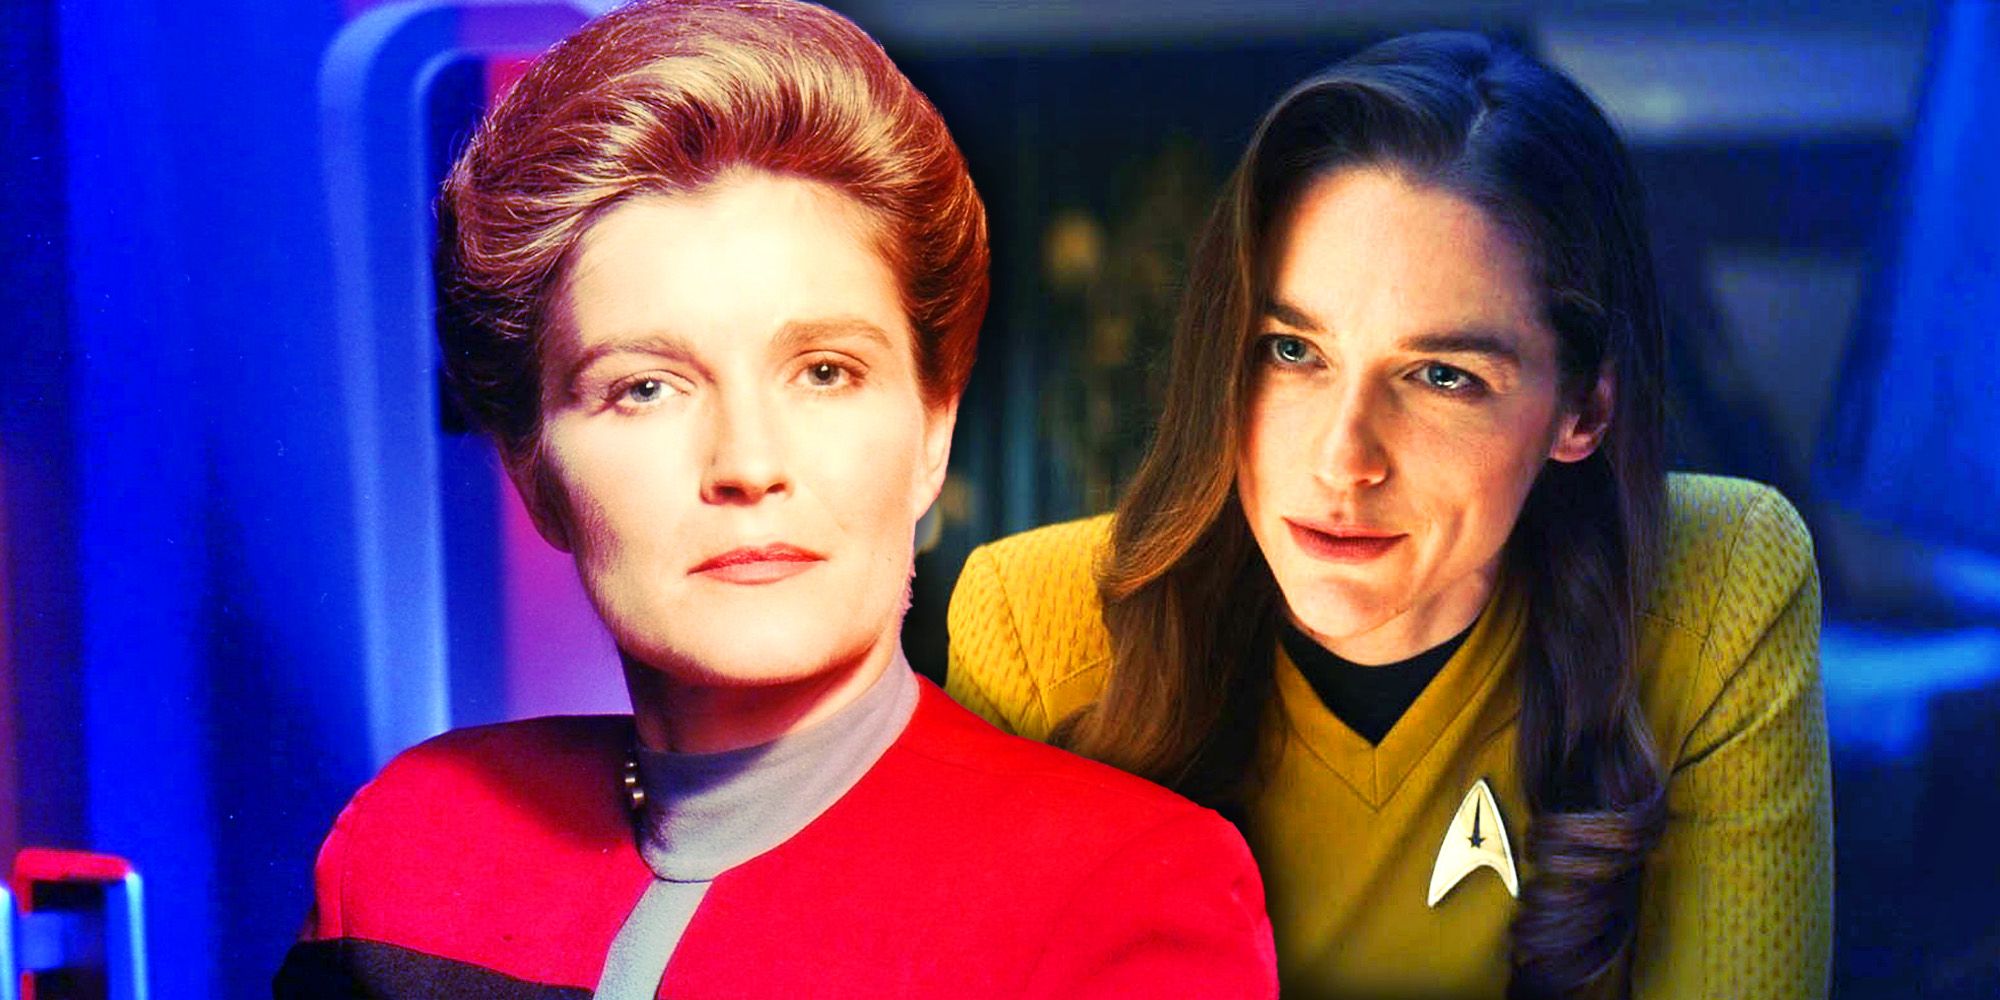 Captain Janeway and Captain Batel from Star Trek: Voyager and Strange New Worlds respectively merged side-by-side.